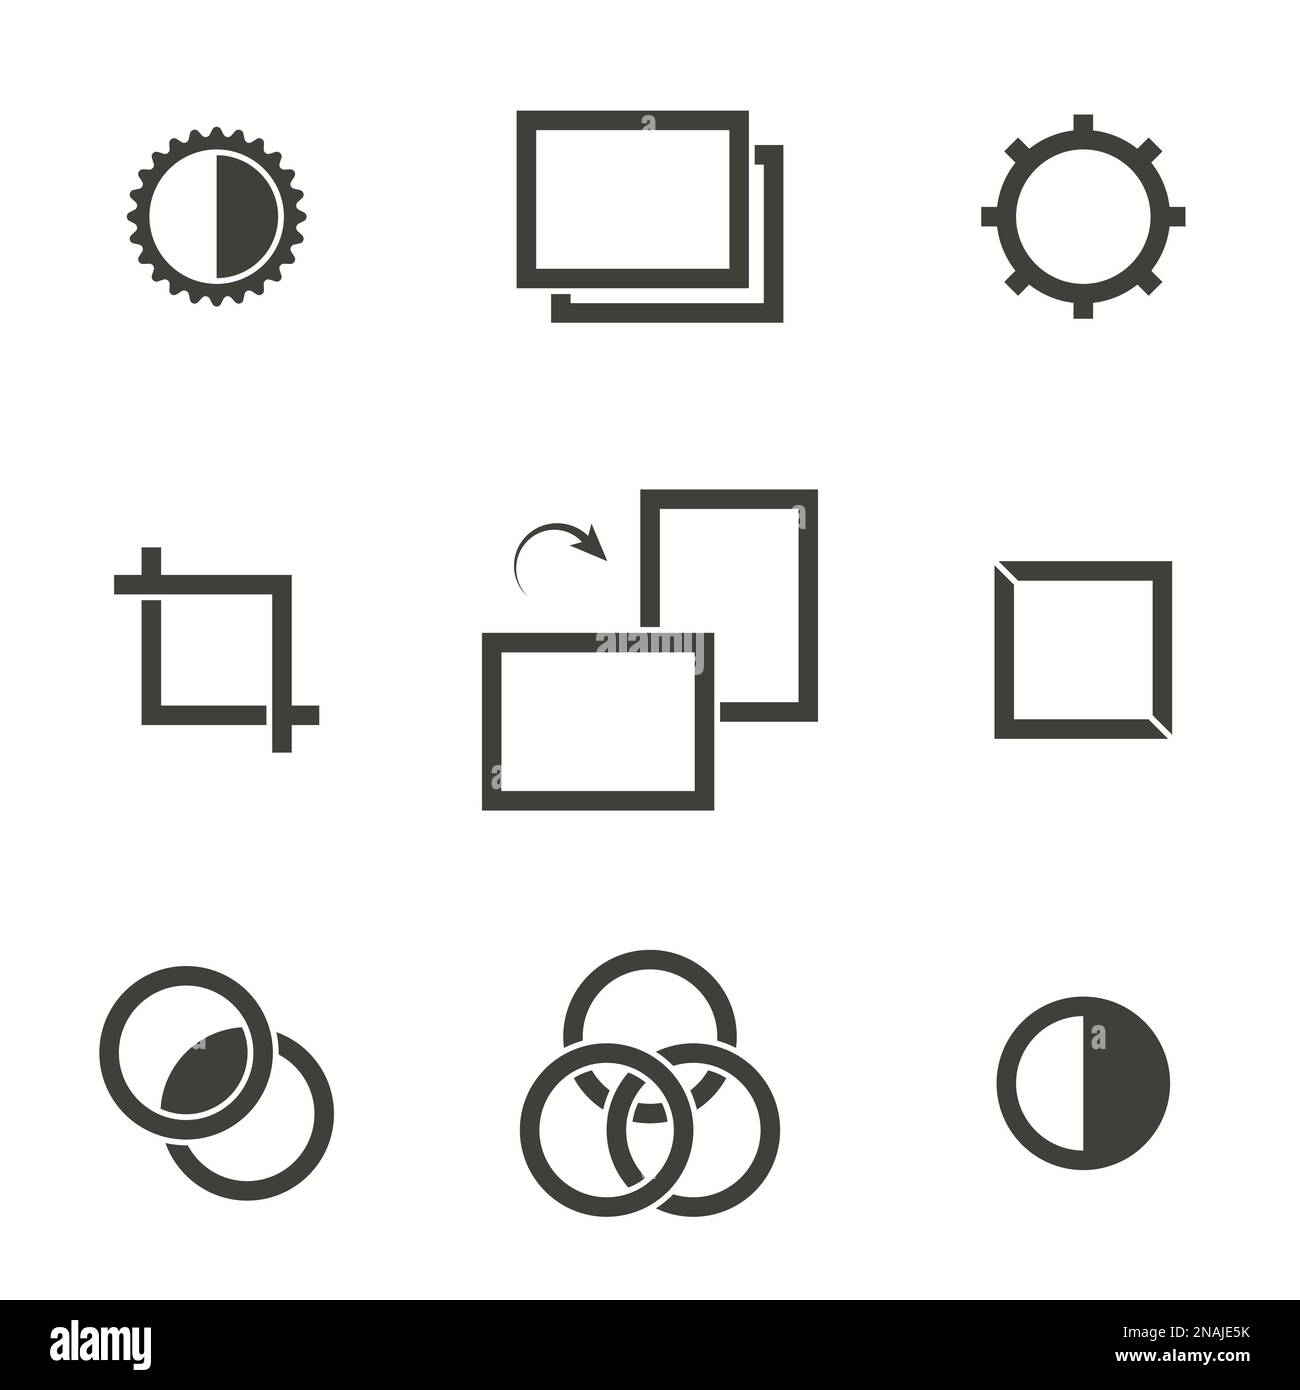 Set of objects on the theme of photography icons Stock Vector